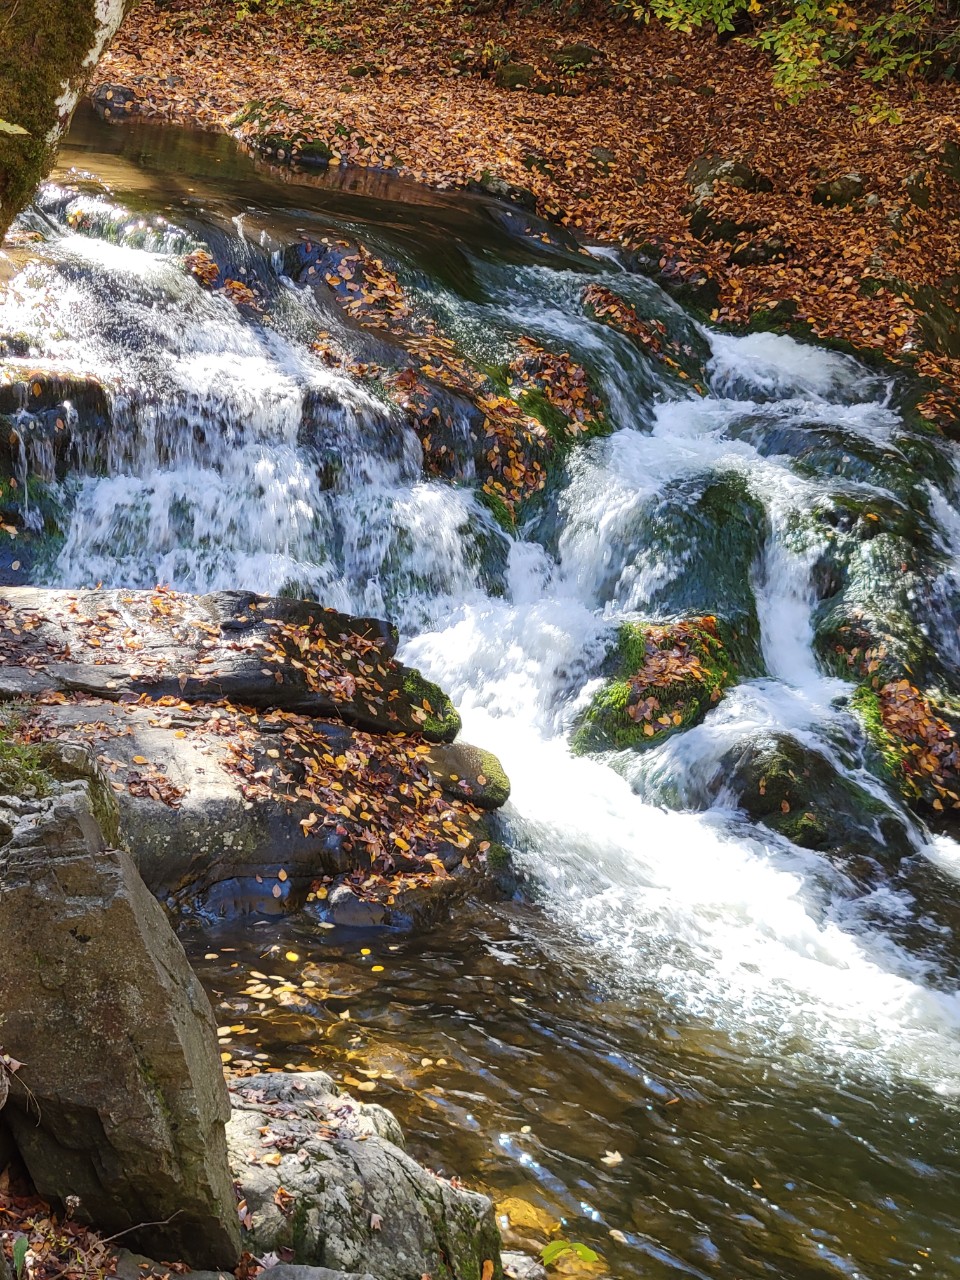 A bubbling waterfall cascades down many rocks with fall leaves covering the banks around the stream.